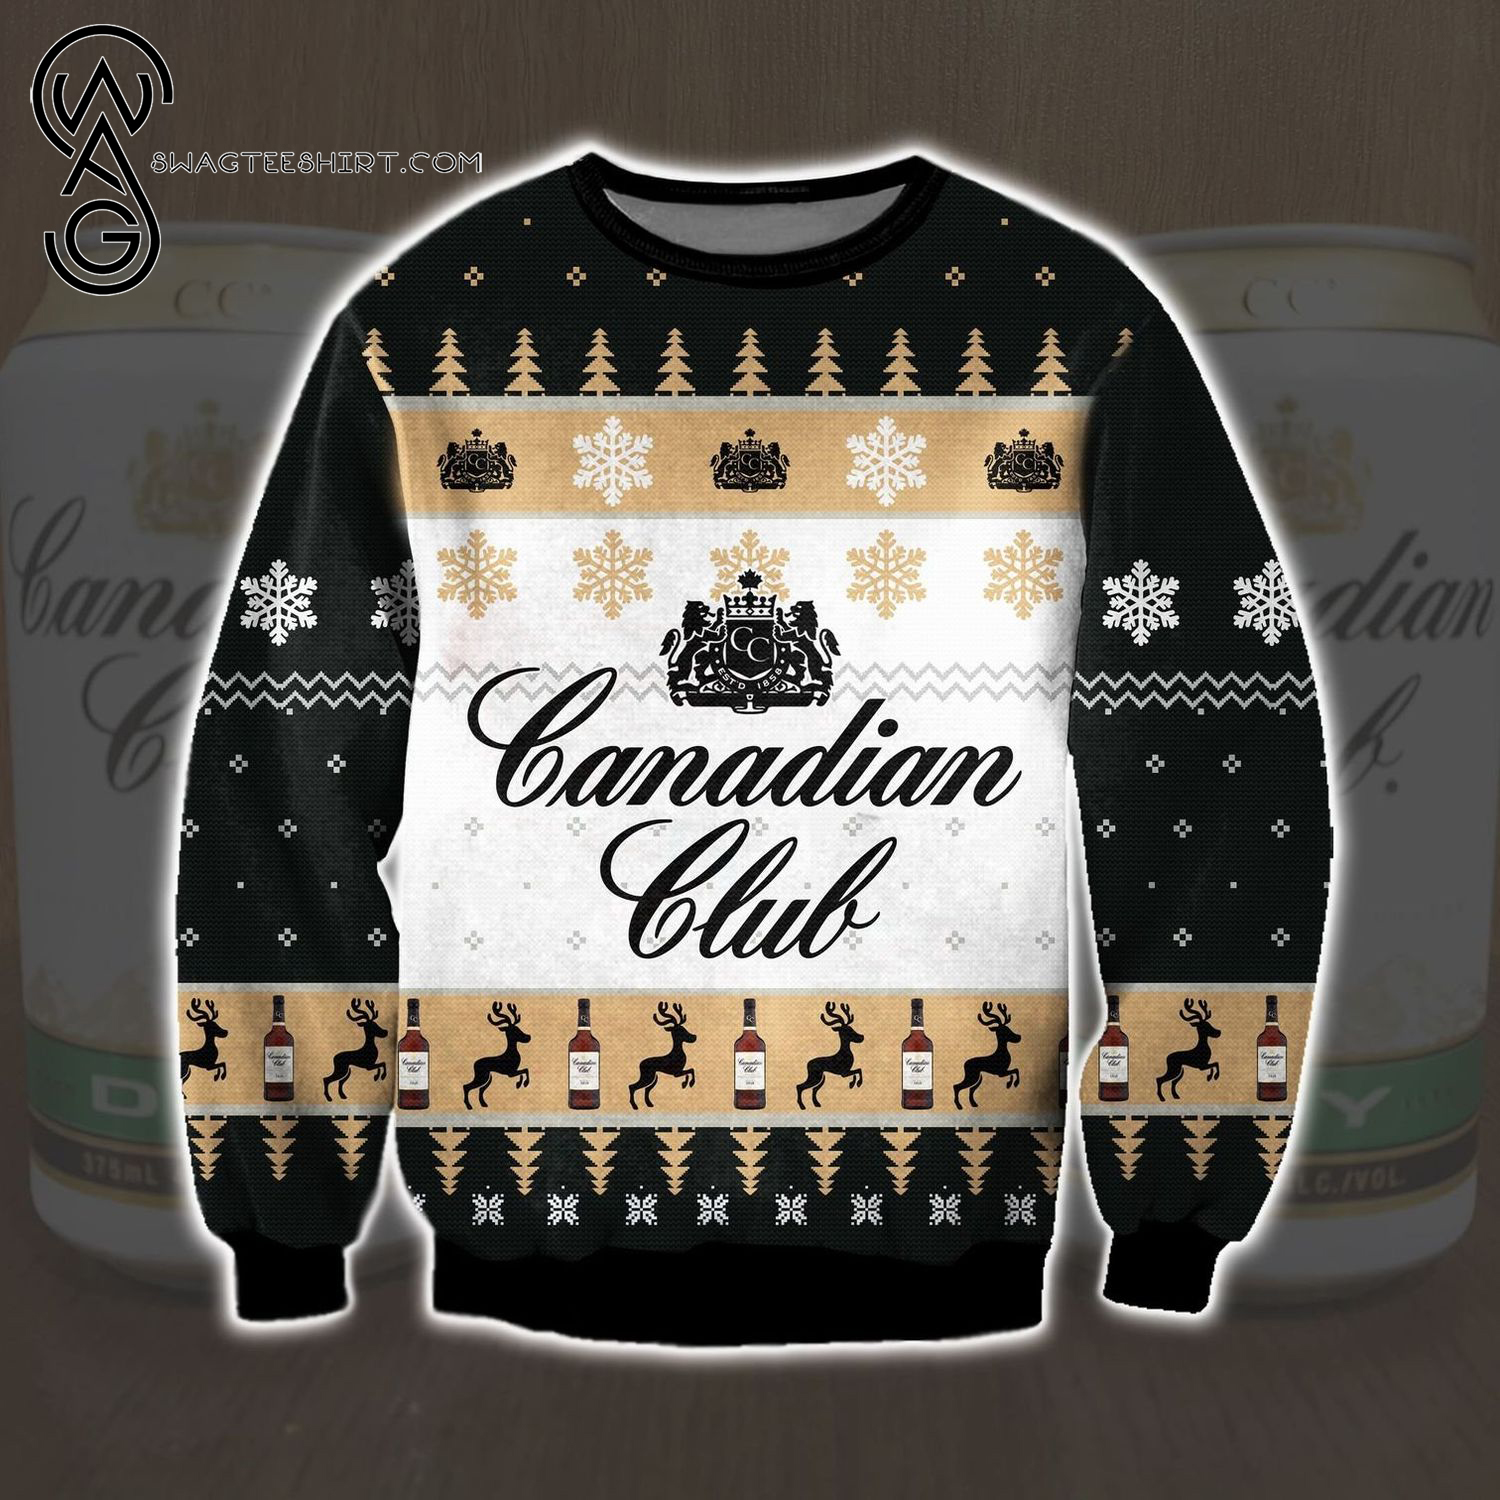 Canadian Club Whisky Full Print Ugly Christmas Sweater